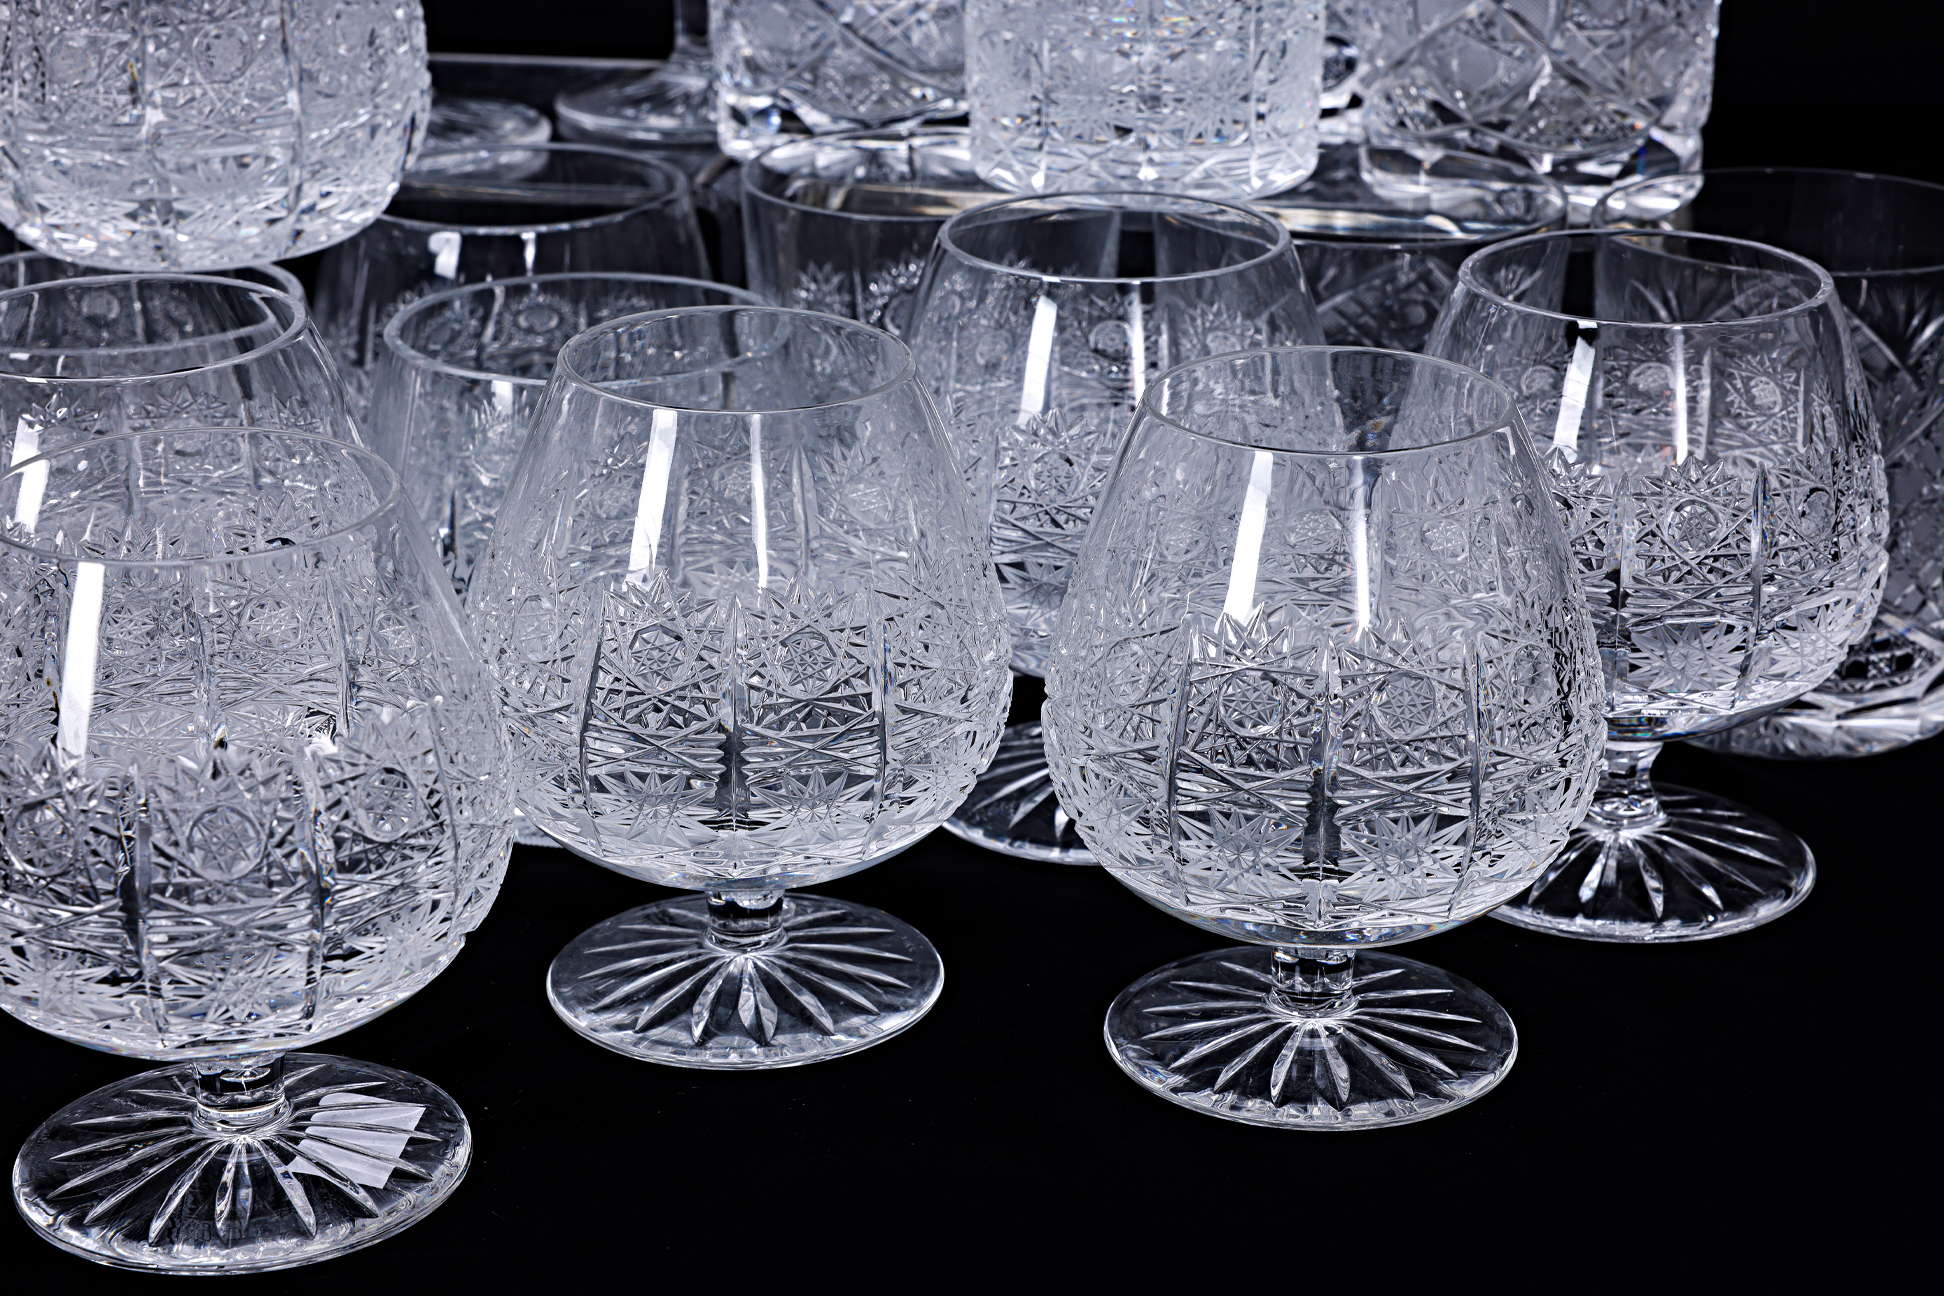 FOUR SETS OF BOHEMIA CRYSTAL GLASSES - Image 3 of 6